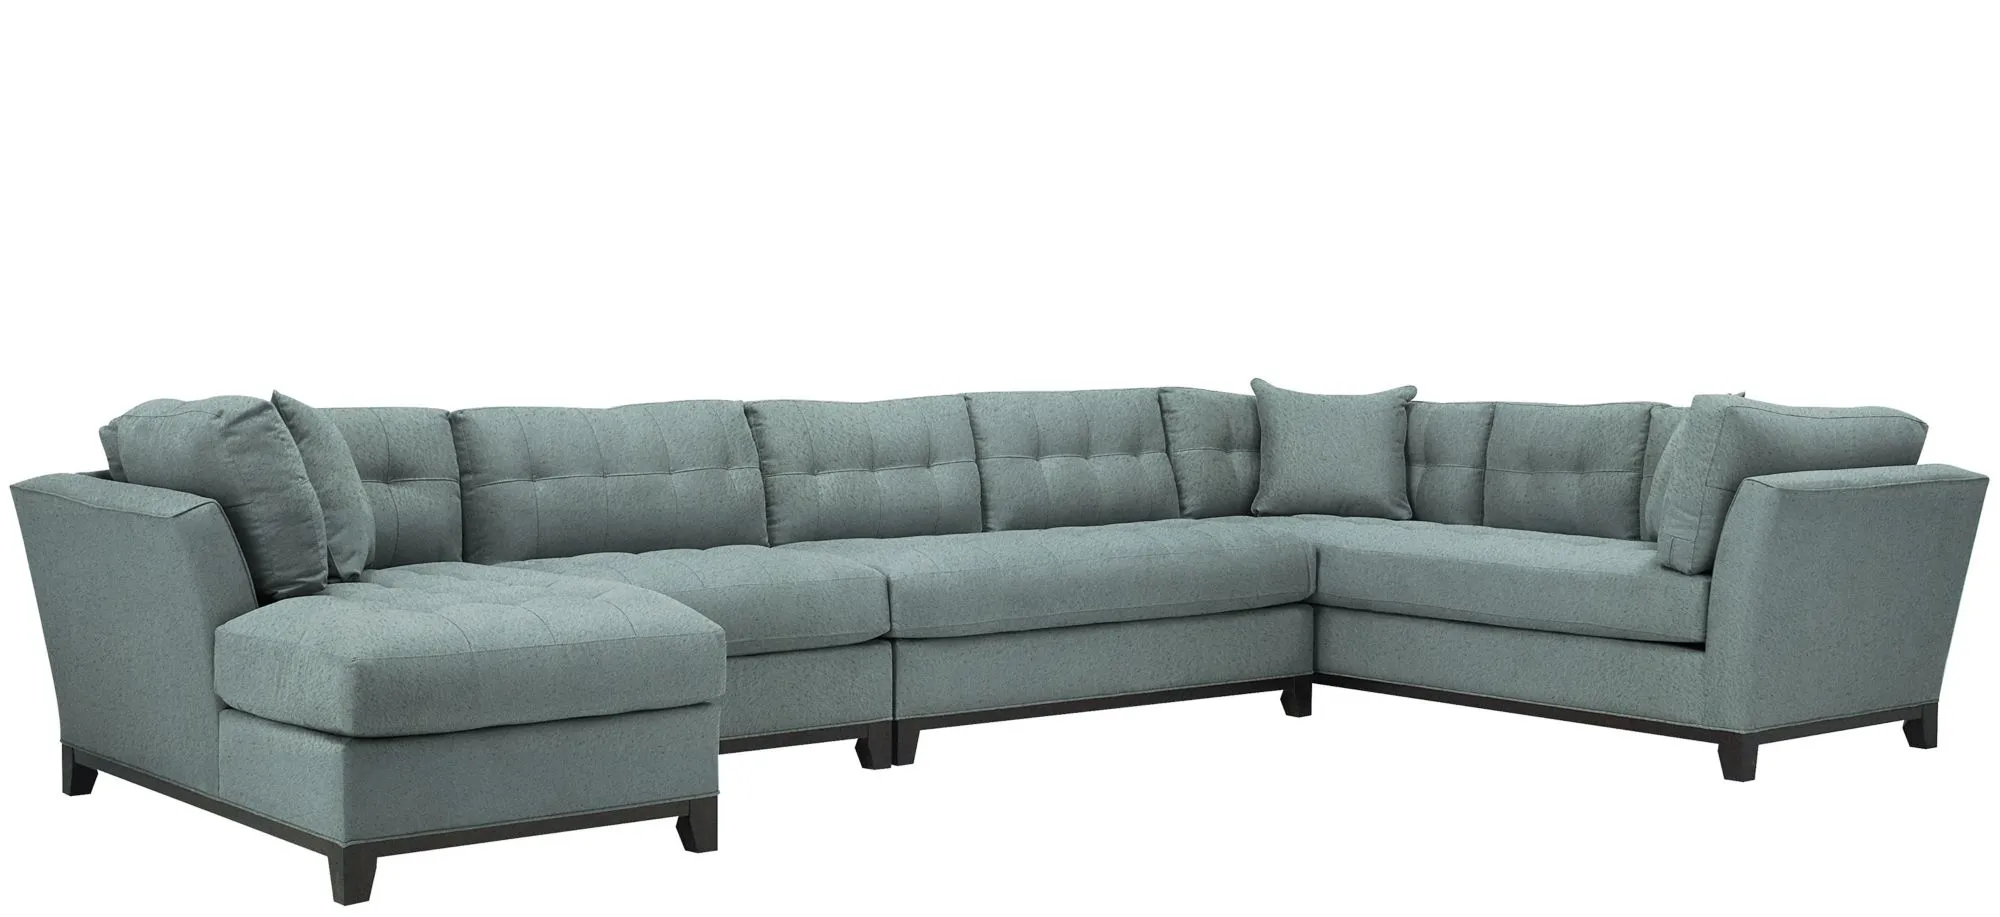 Cityscape 4-pc. Sectional in Suede So Soft Hydra by H.M. Richards